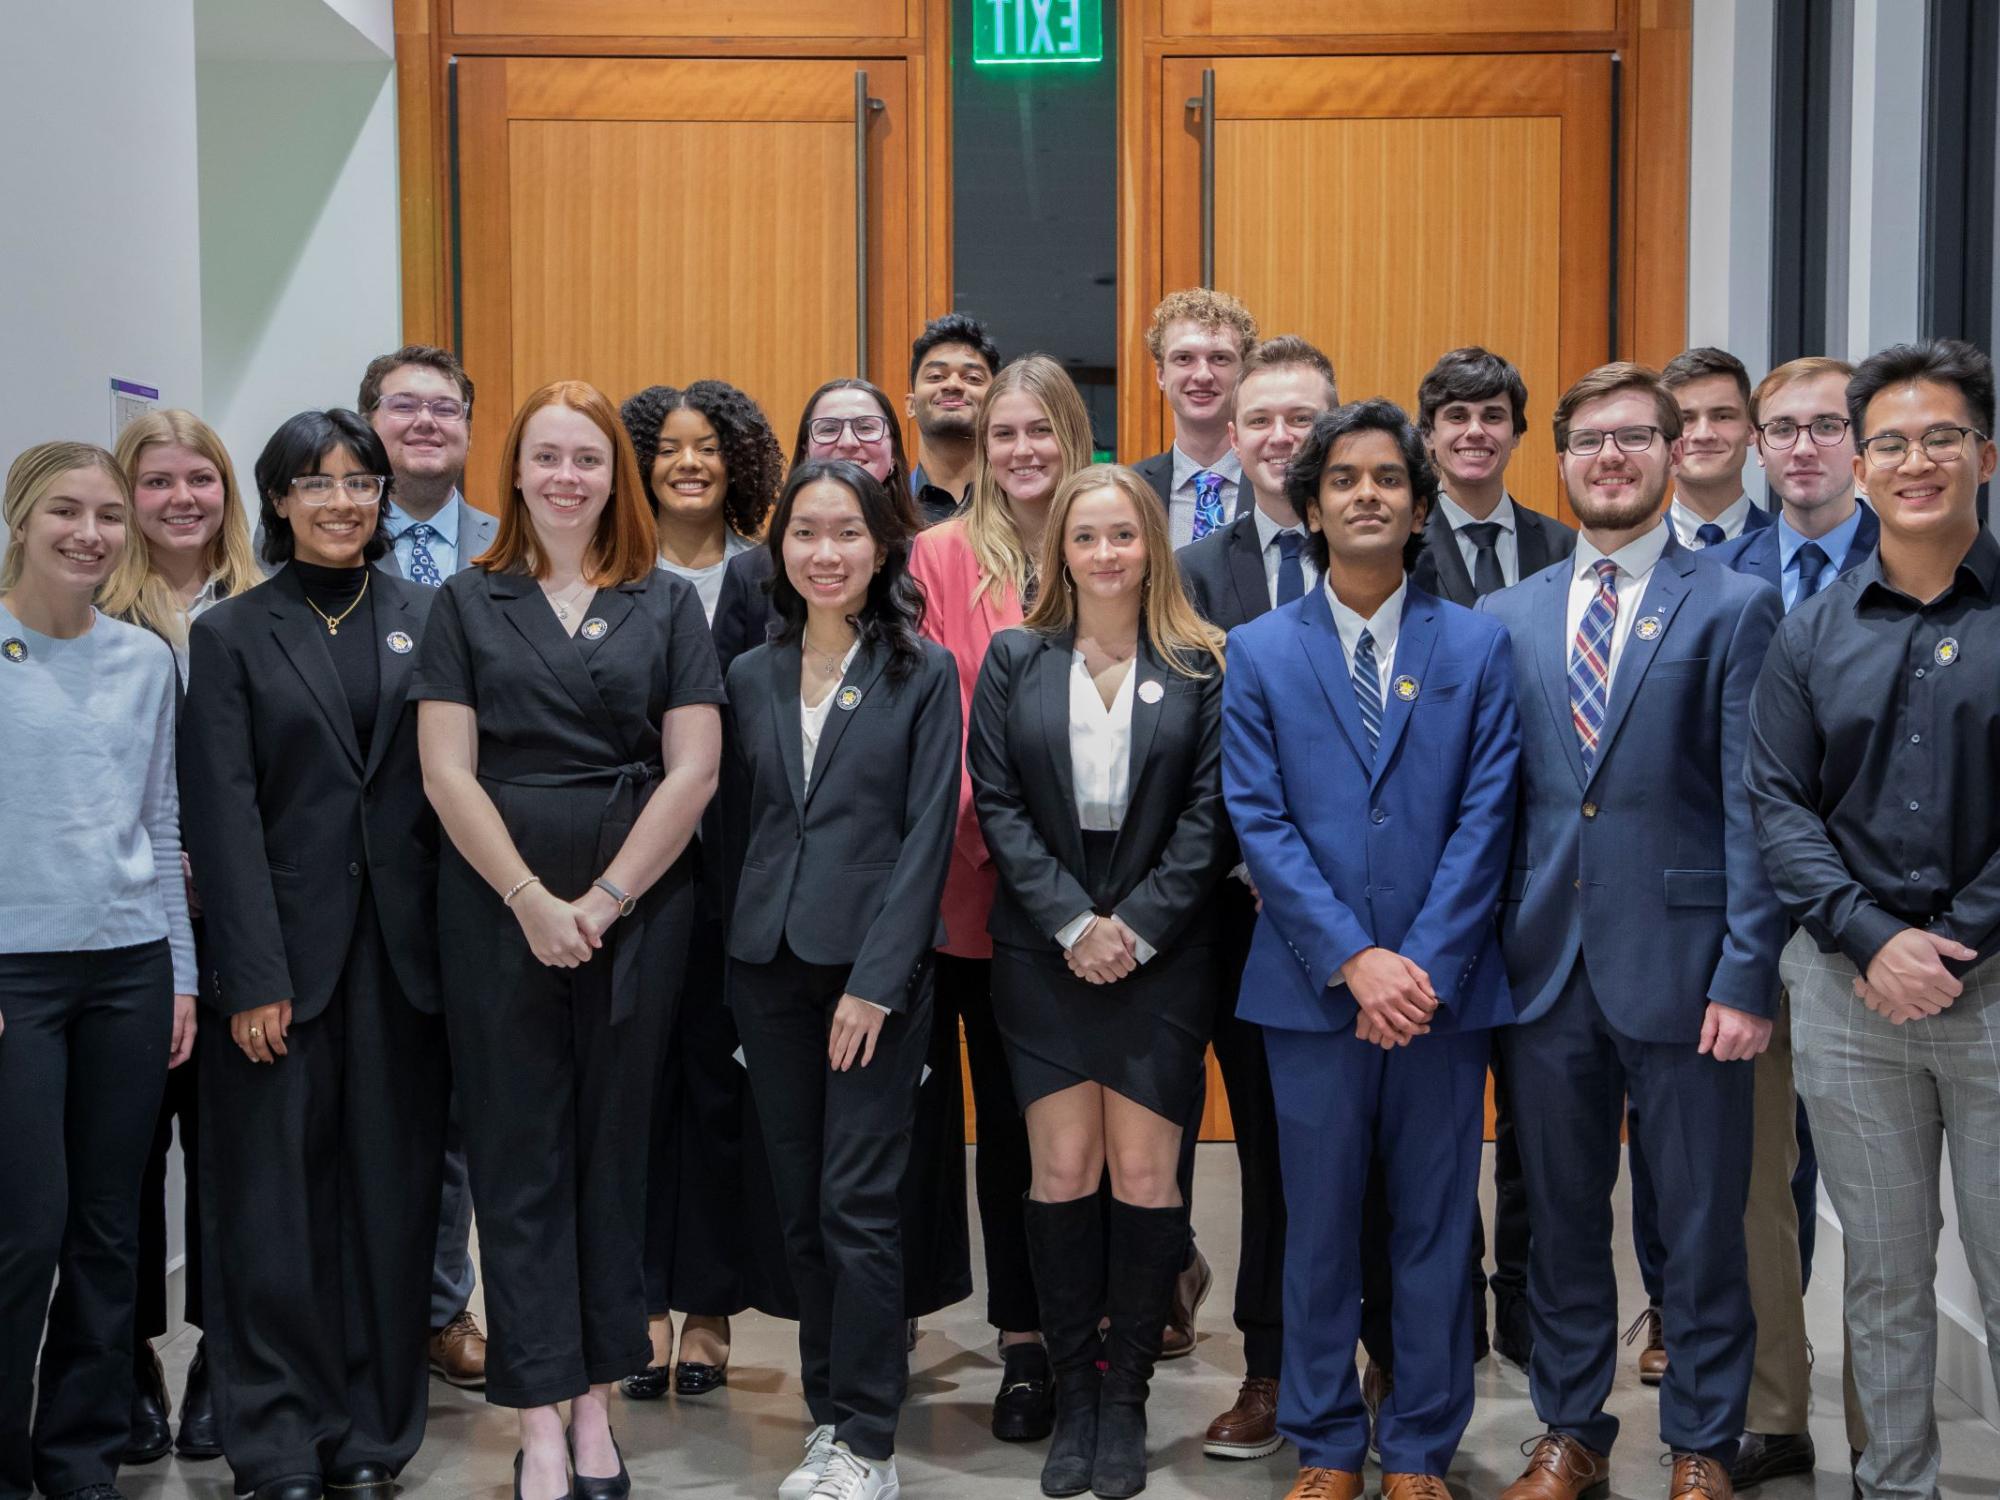 Order of the Sword and Shield National Honor Society installs Penn State chapter